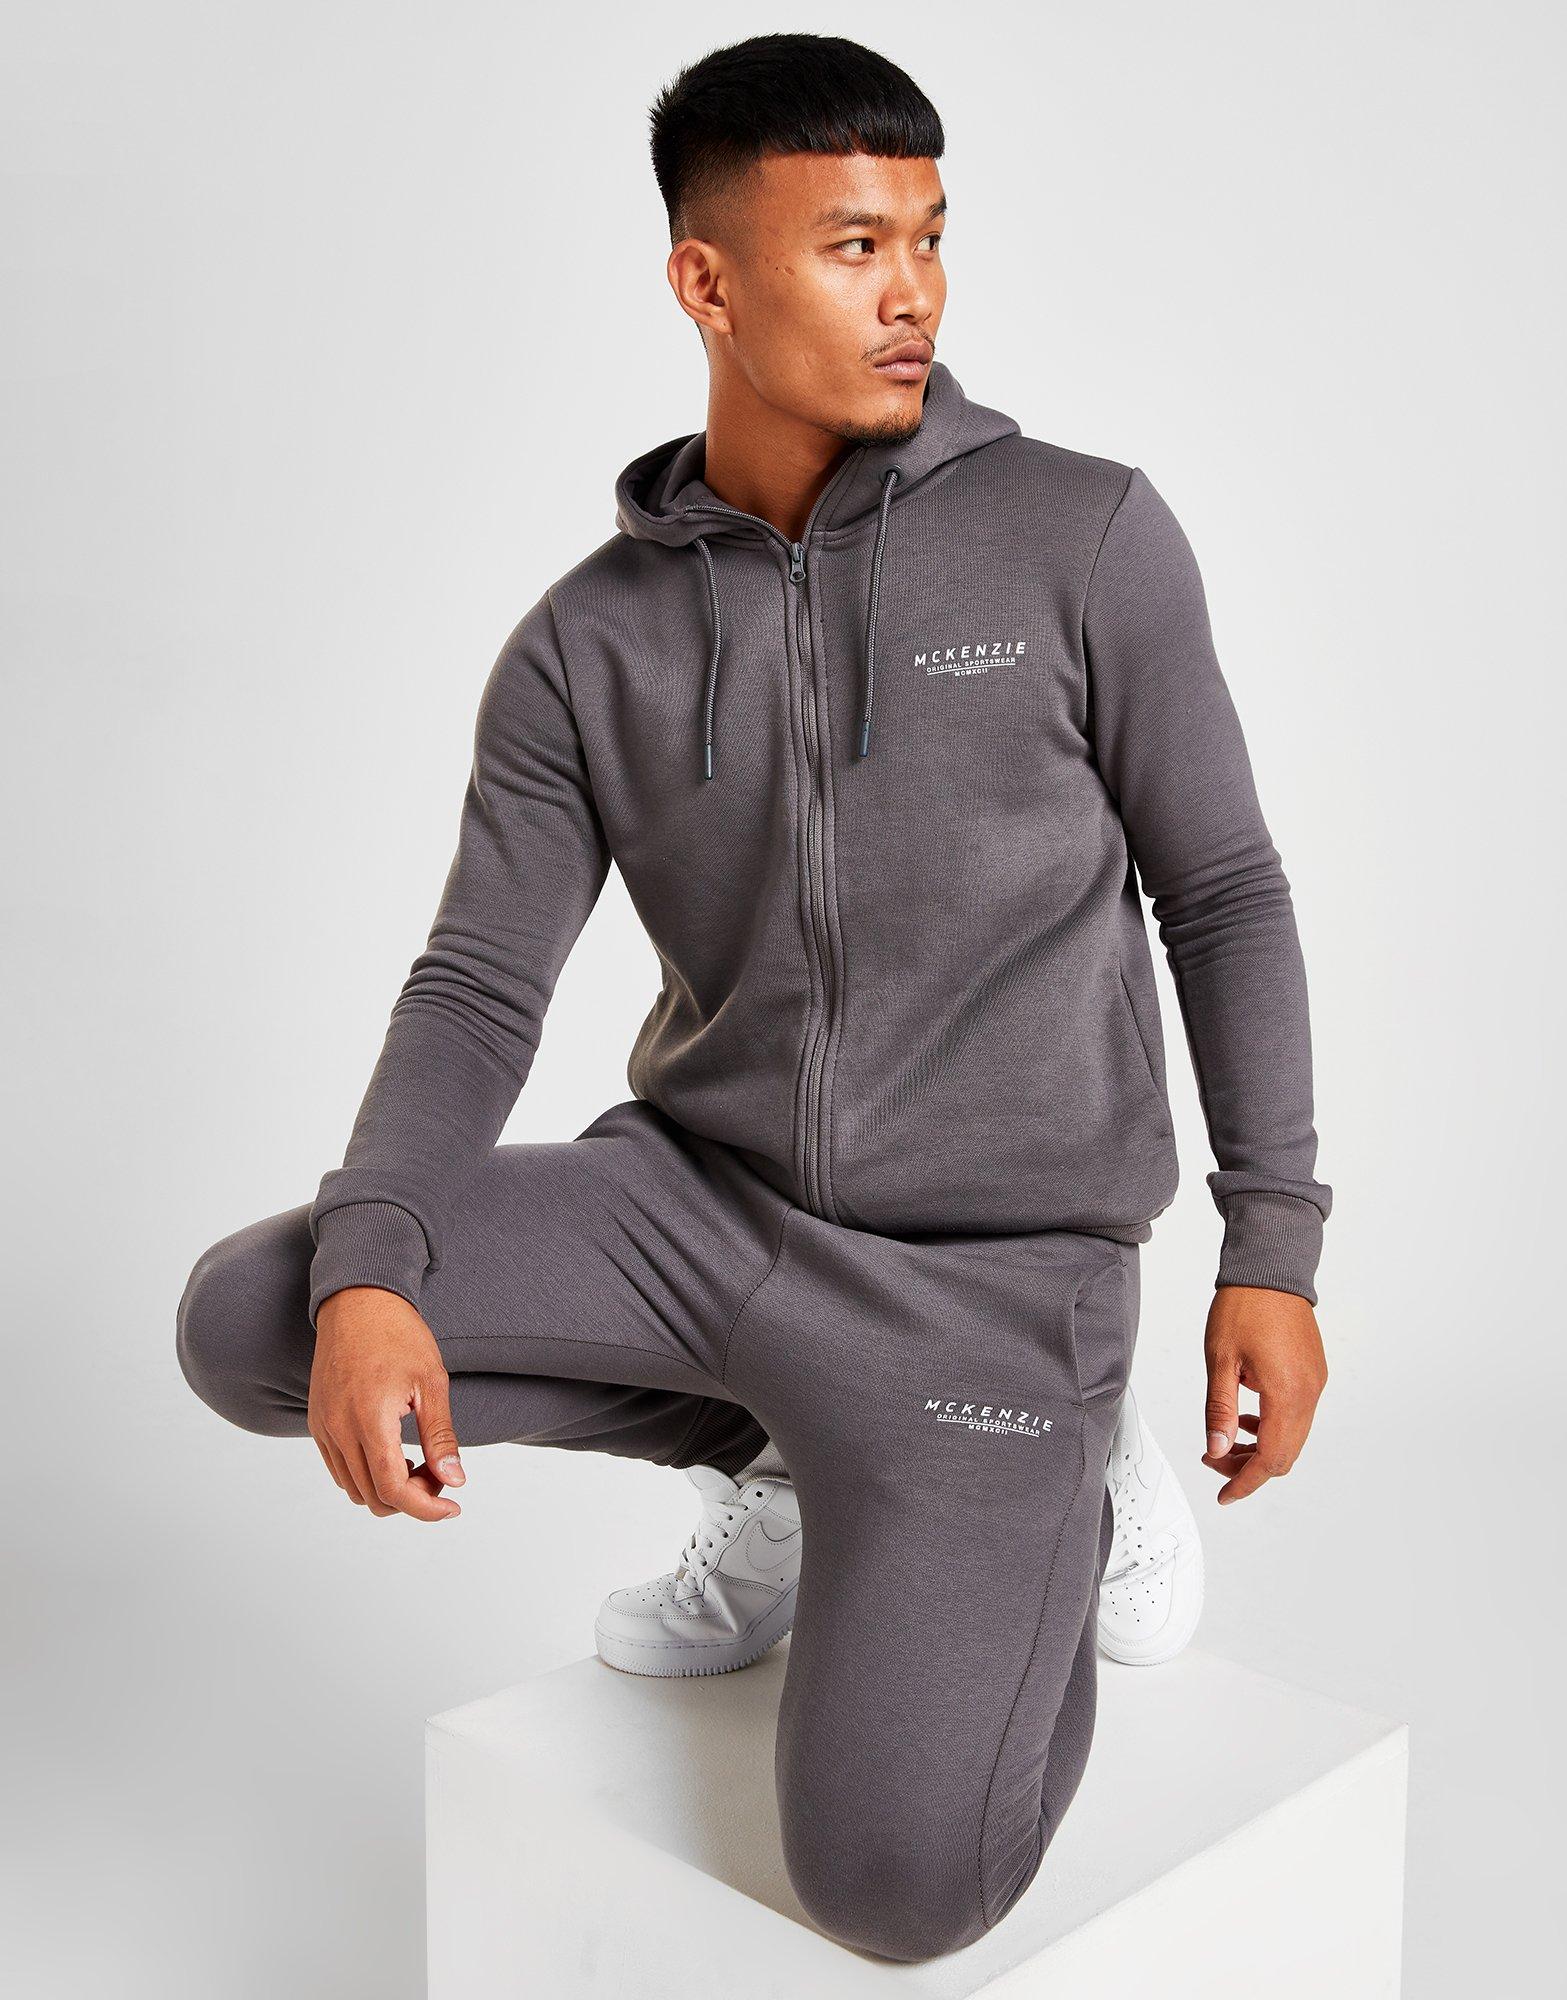 New McKenzie Men’s Essential Tracksuit from JD Outlet | eBay